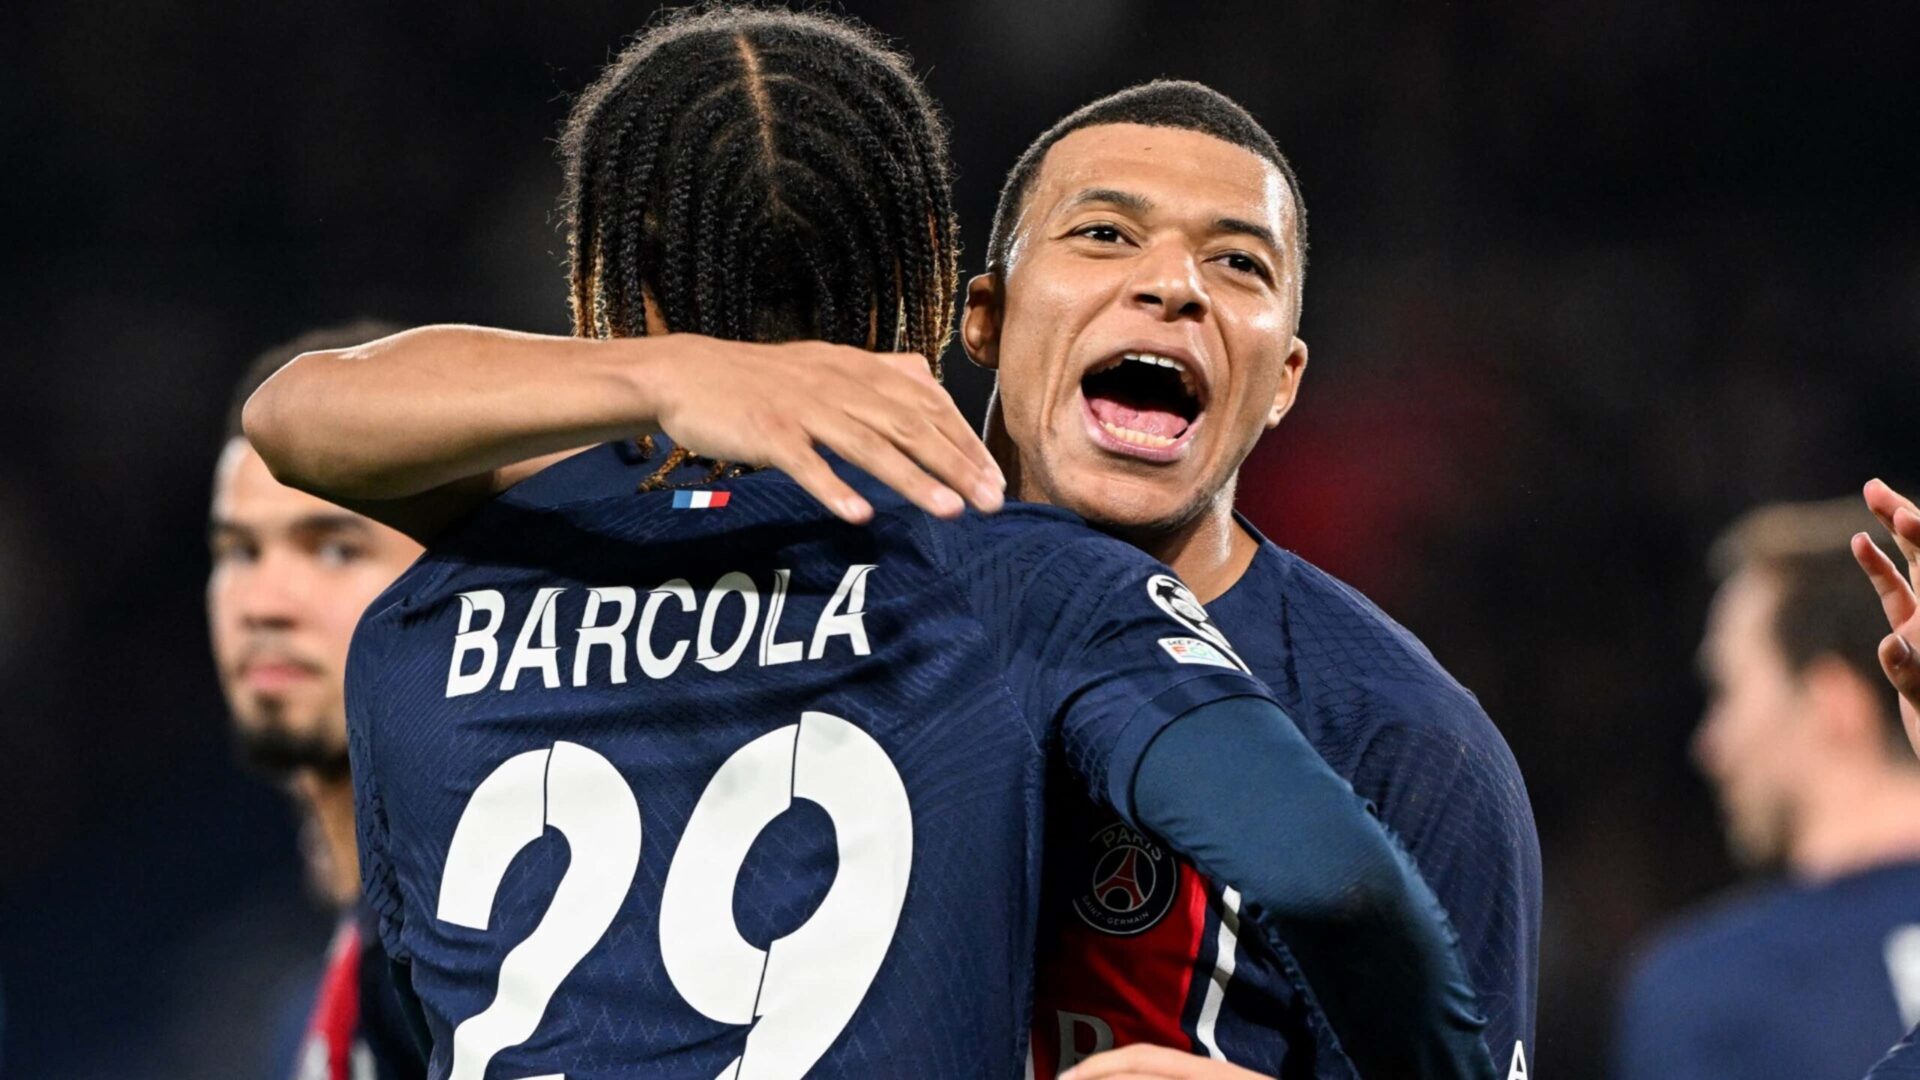 Mbappe nets as PSG triumph over Real Sociedad in the first leg